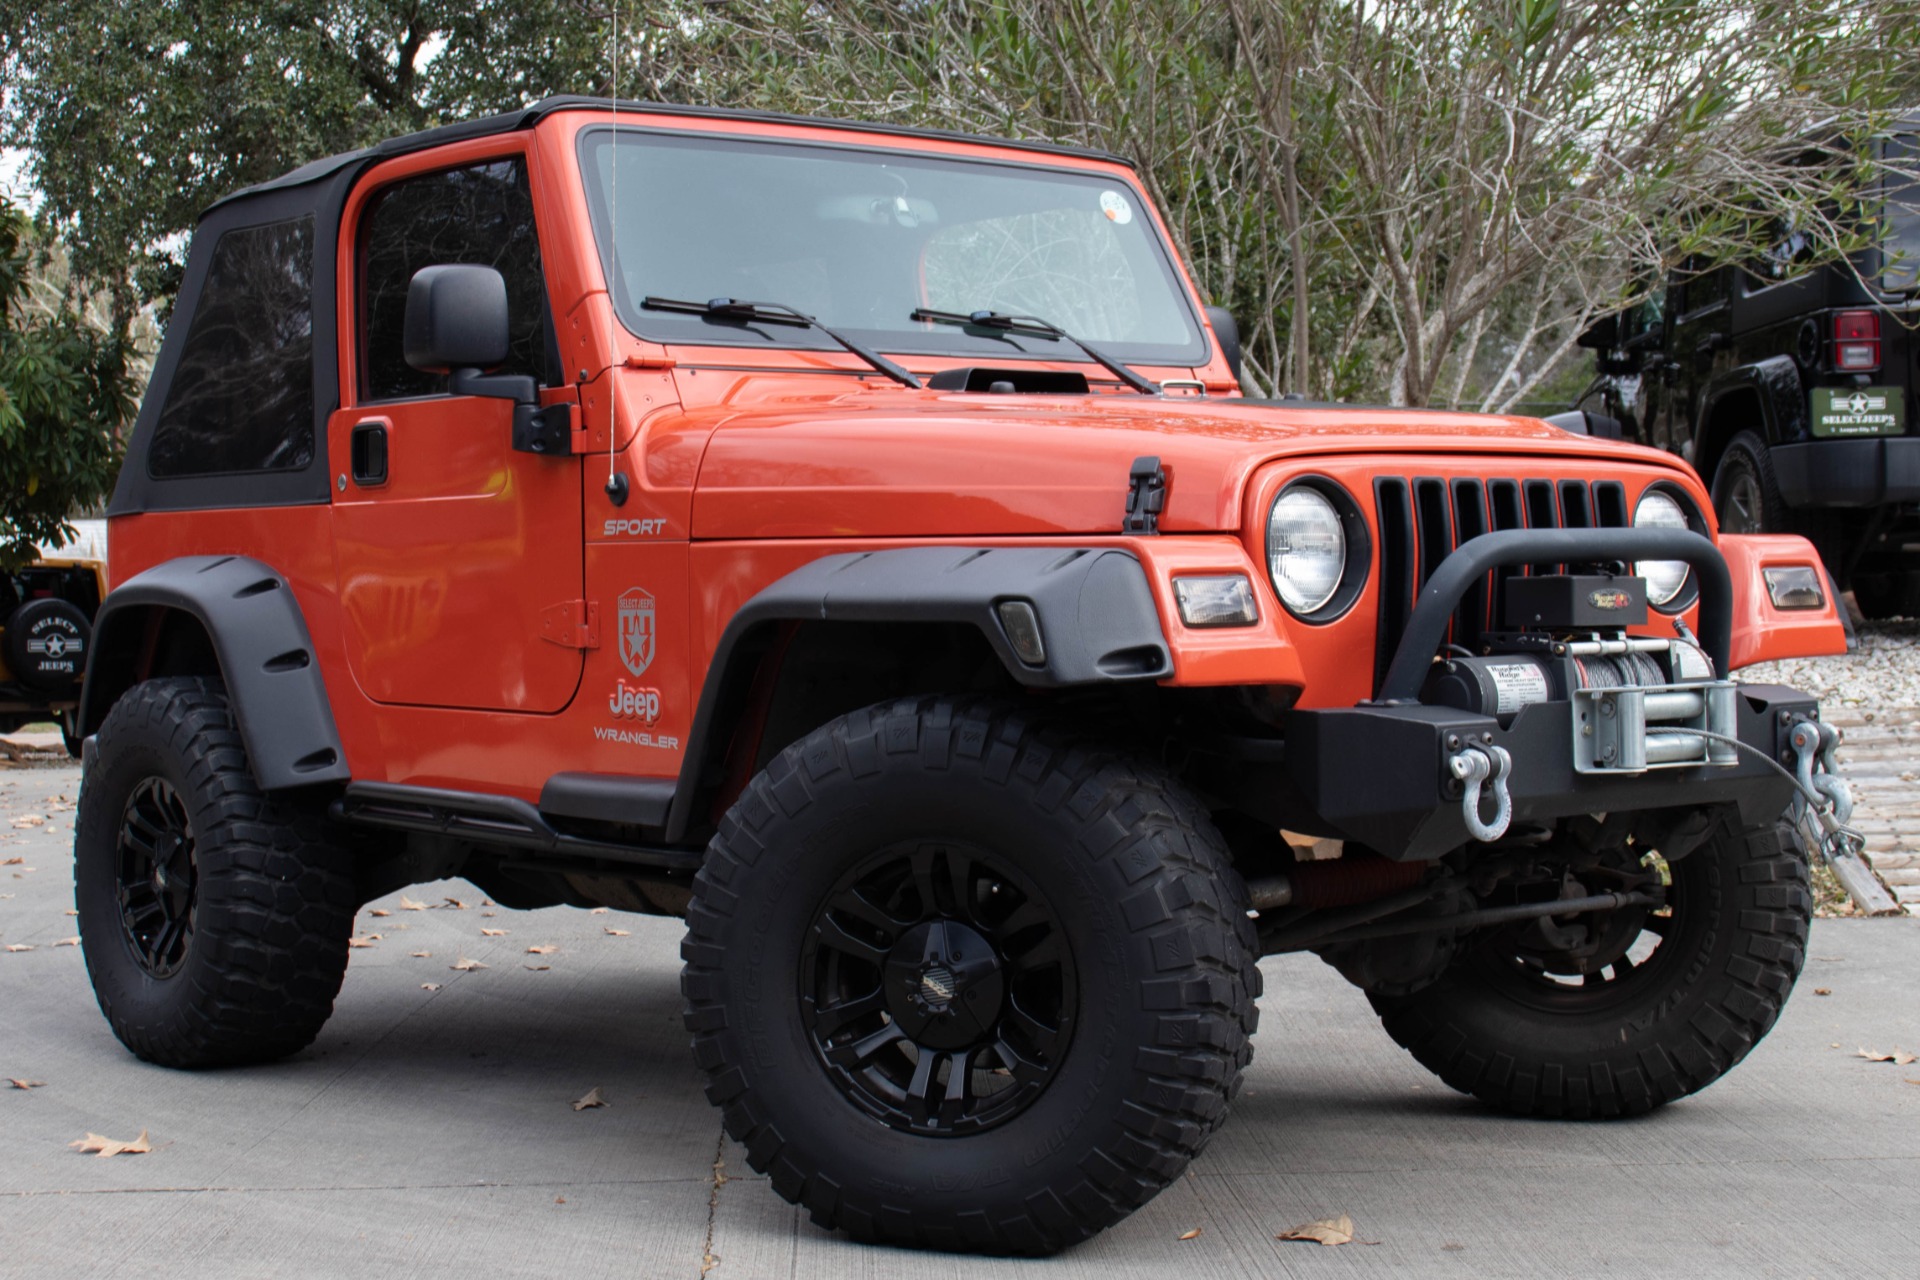 Used 2006 Jeep Wrangler 2dr Sport For Sale ($13,995) | Select Jeeps Inc.  Stock #745837